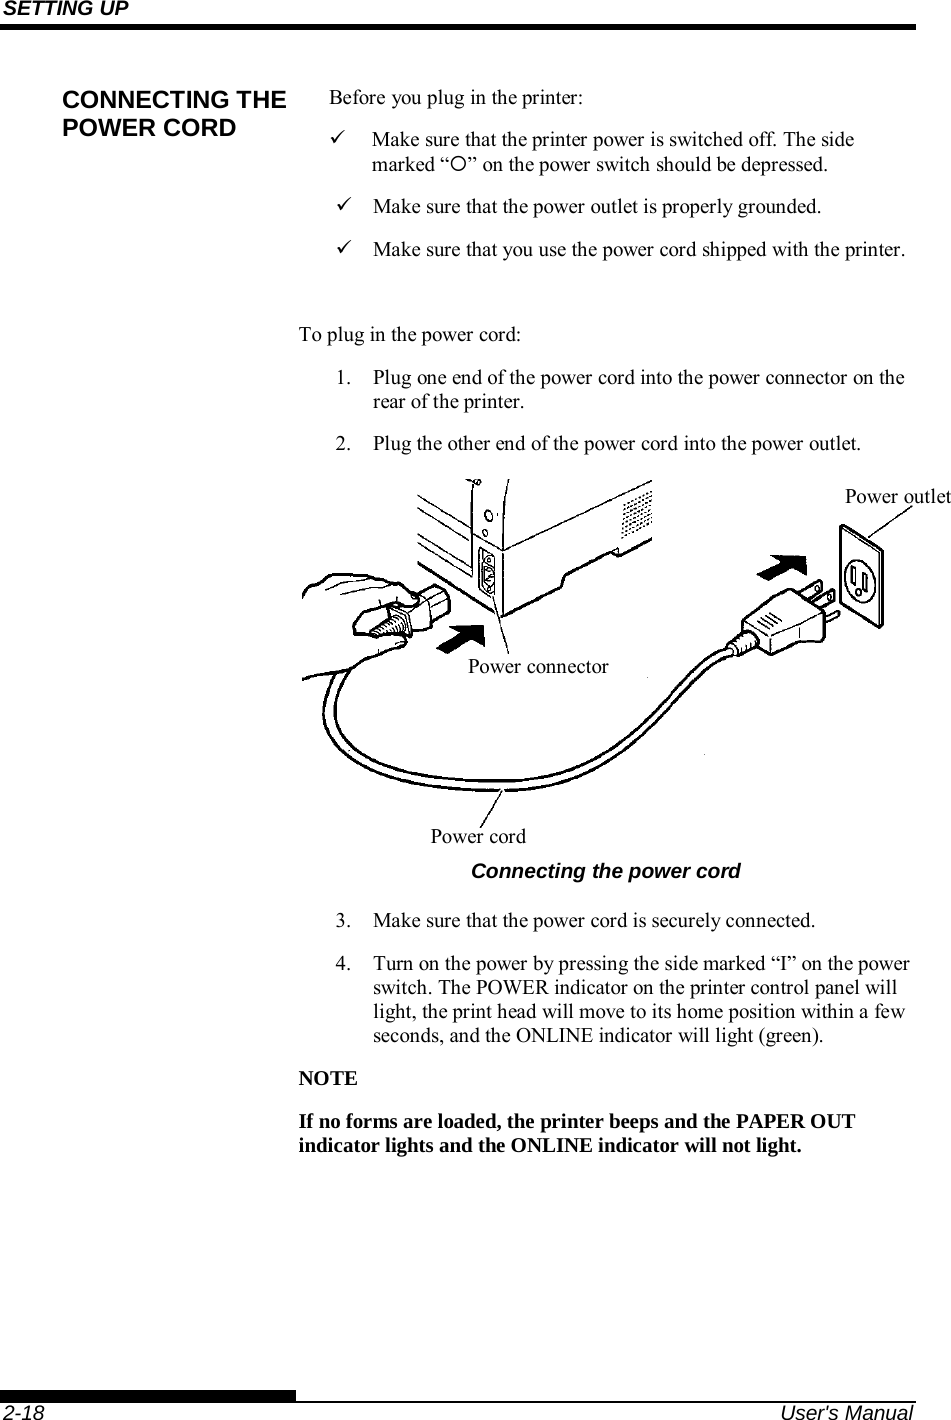 SETTING UP    2-18  User&apos;s Manual Before you plug in the printer:   Make sure that the printer power is switched off. The side marked “” on the power switch should be depressed.   Make sure that the power outlet is properly grounded.   Make sure that you use the power cord shipped with the printer.  To plug in the power cord: 1.  Plug one end of the power cord into the power connector on the rear of the printer. 2.  Plug the other end of the power cord into the power outlet.  Connecting the power cord 3.  Make sure that the power cord is securely connected. 4.  Turn on the power by pressing the side marked “I” on the power switch. The POWER indicator on the printer control panel will light, the print head will move to its home position within a few seconds, and the ONLINE indicator will light (green). NOTE If no forms are loaded, the printer beeps and the PAPER OUT indicator lights and the ONLINE indicator will not light.  CONNECTING THE POWER CORD Power connector Power cord Power outlet 